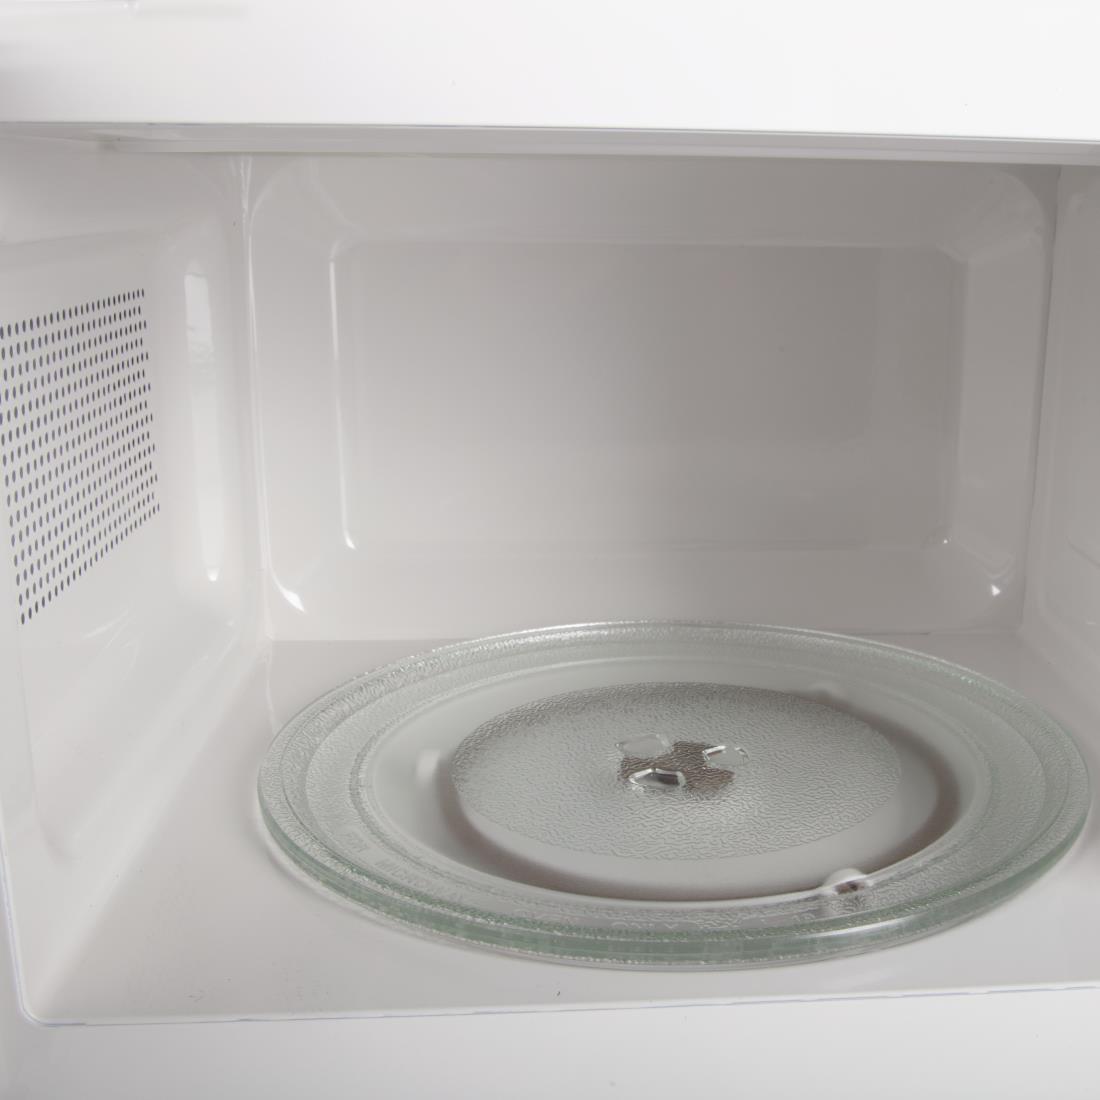 Caterlite Compact Microwave 17ltr 700W - CN180  - 3